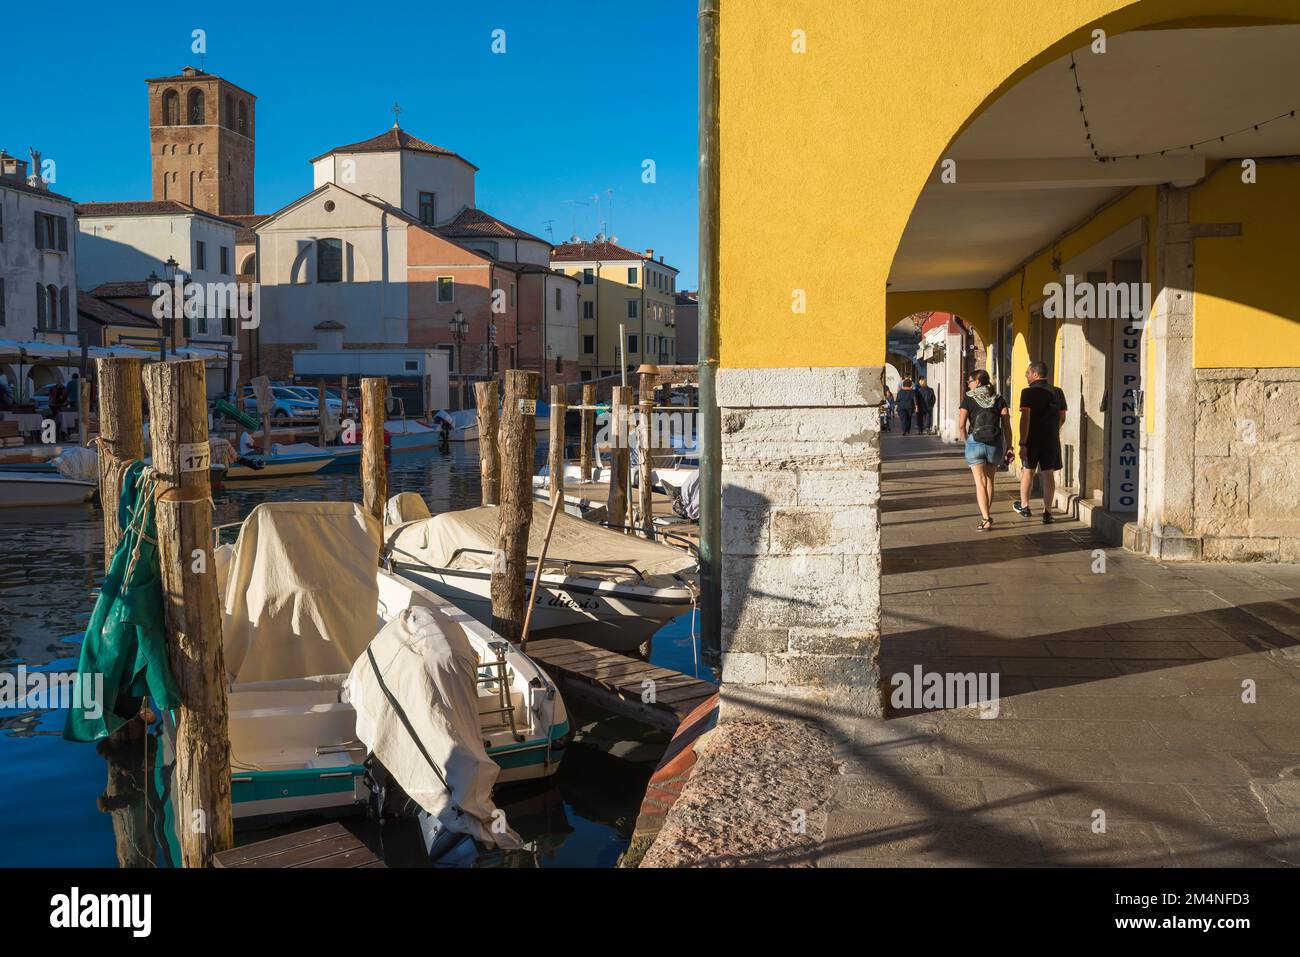 Veneto tourism, view in summer of a young couple wandering under historic colonnades in the scenic Venetian town of Chioggia, Veneto, Italy Stock Photo